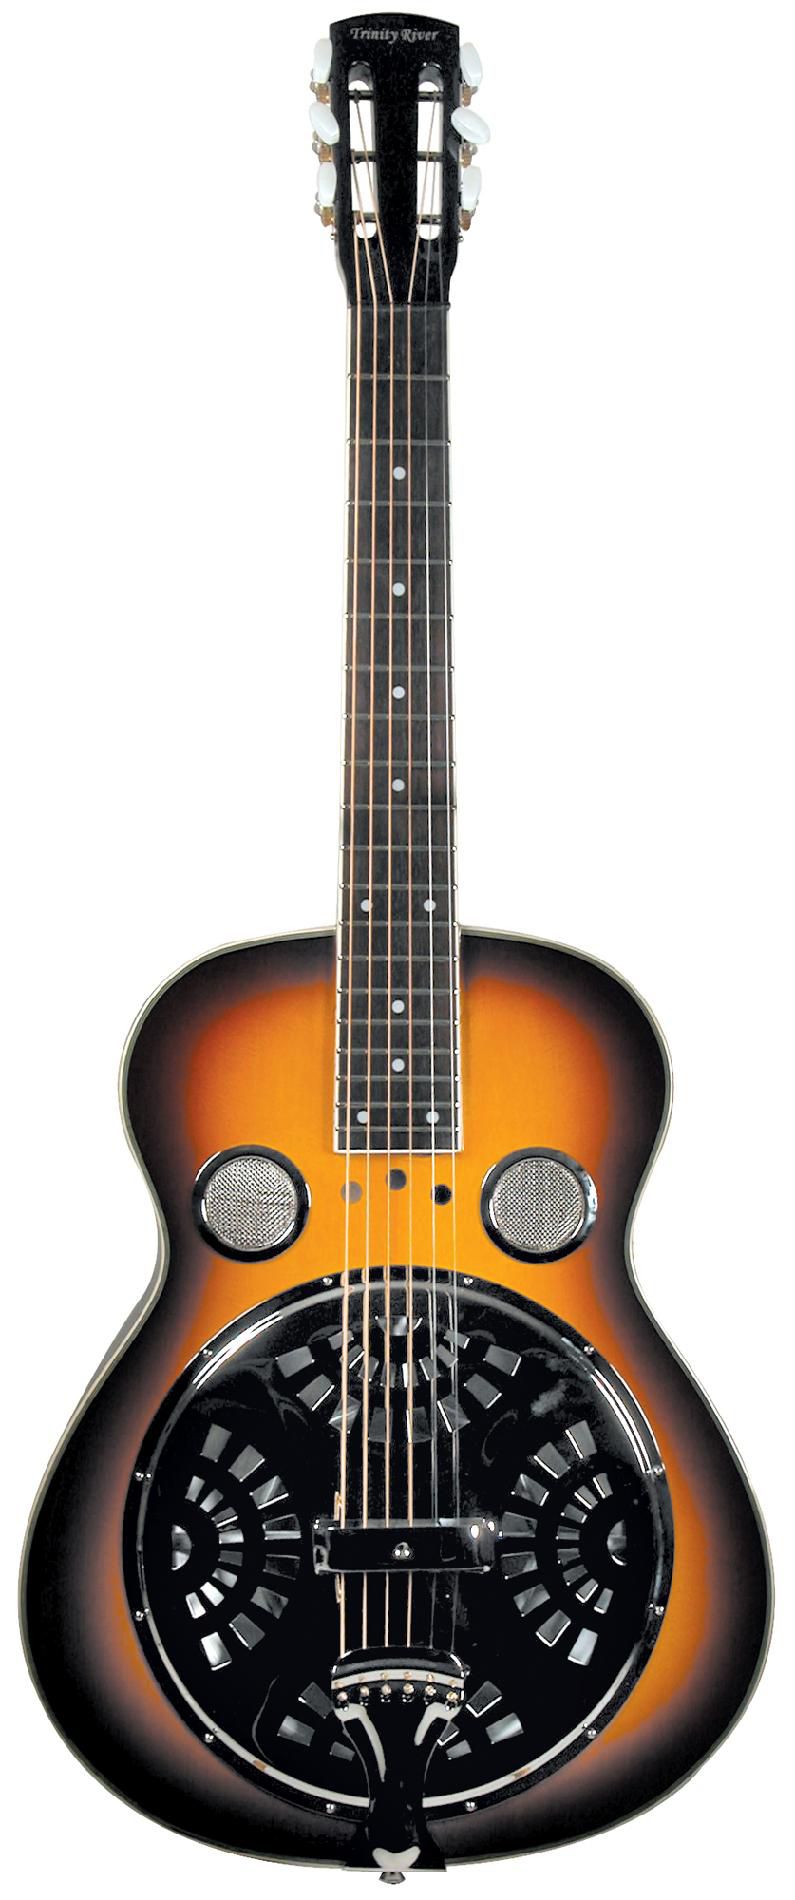 The Trinity River Mudslide Resonator Guitar with Square Neck and Tolex-covered, hard case.